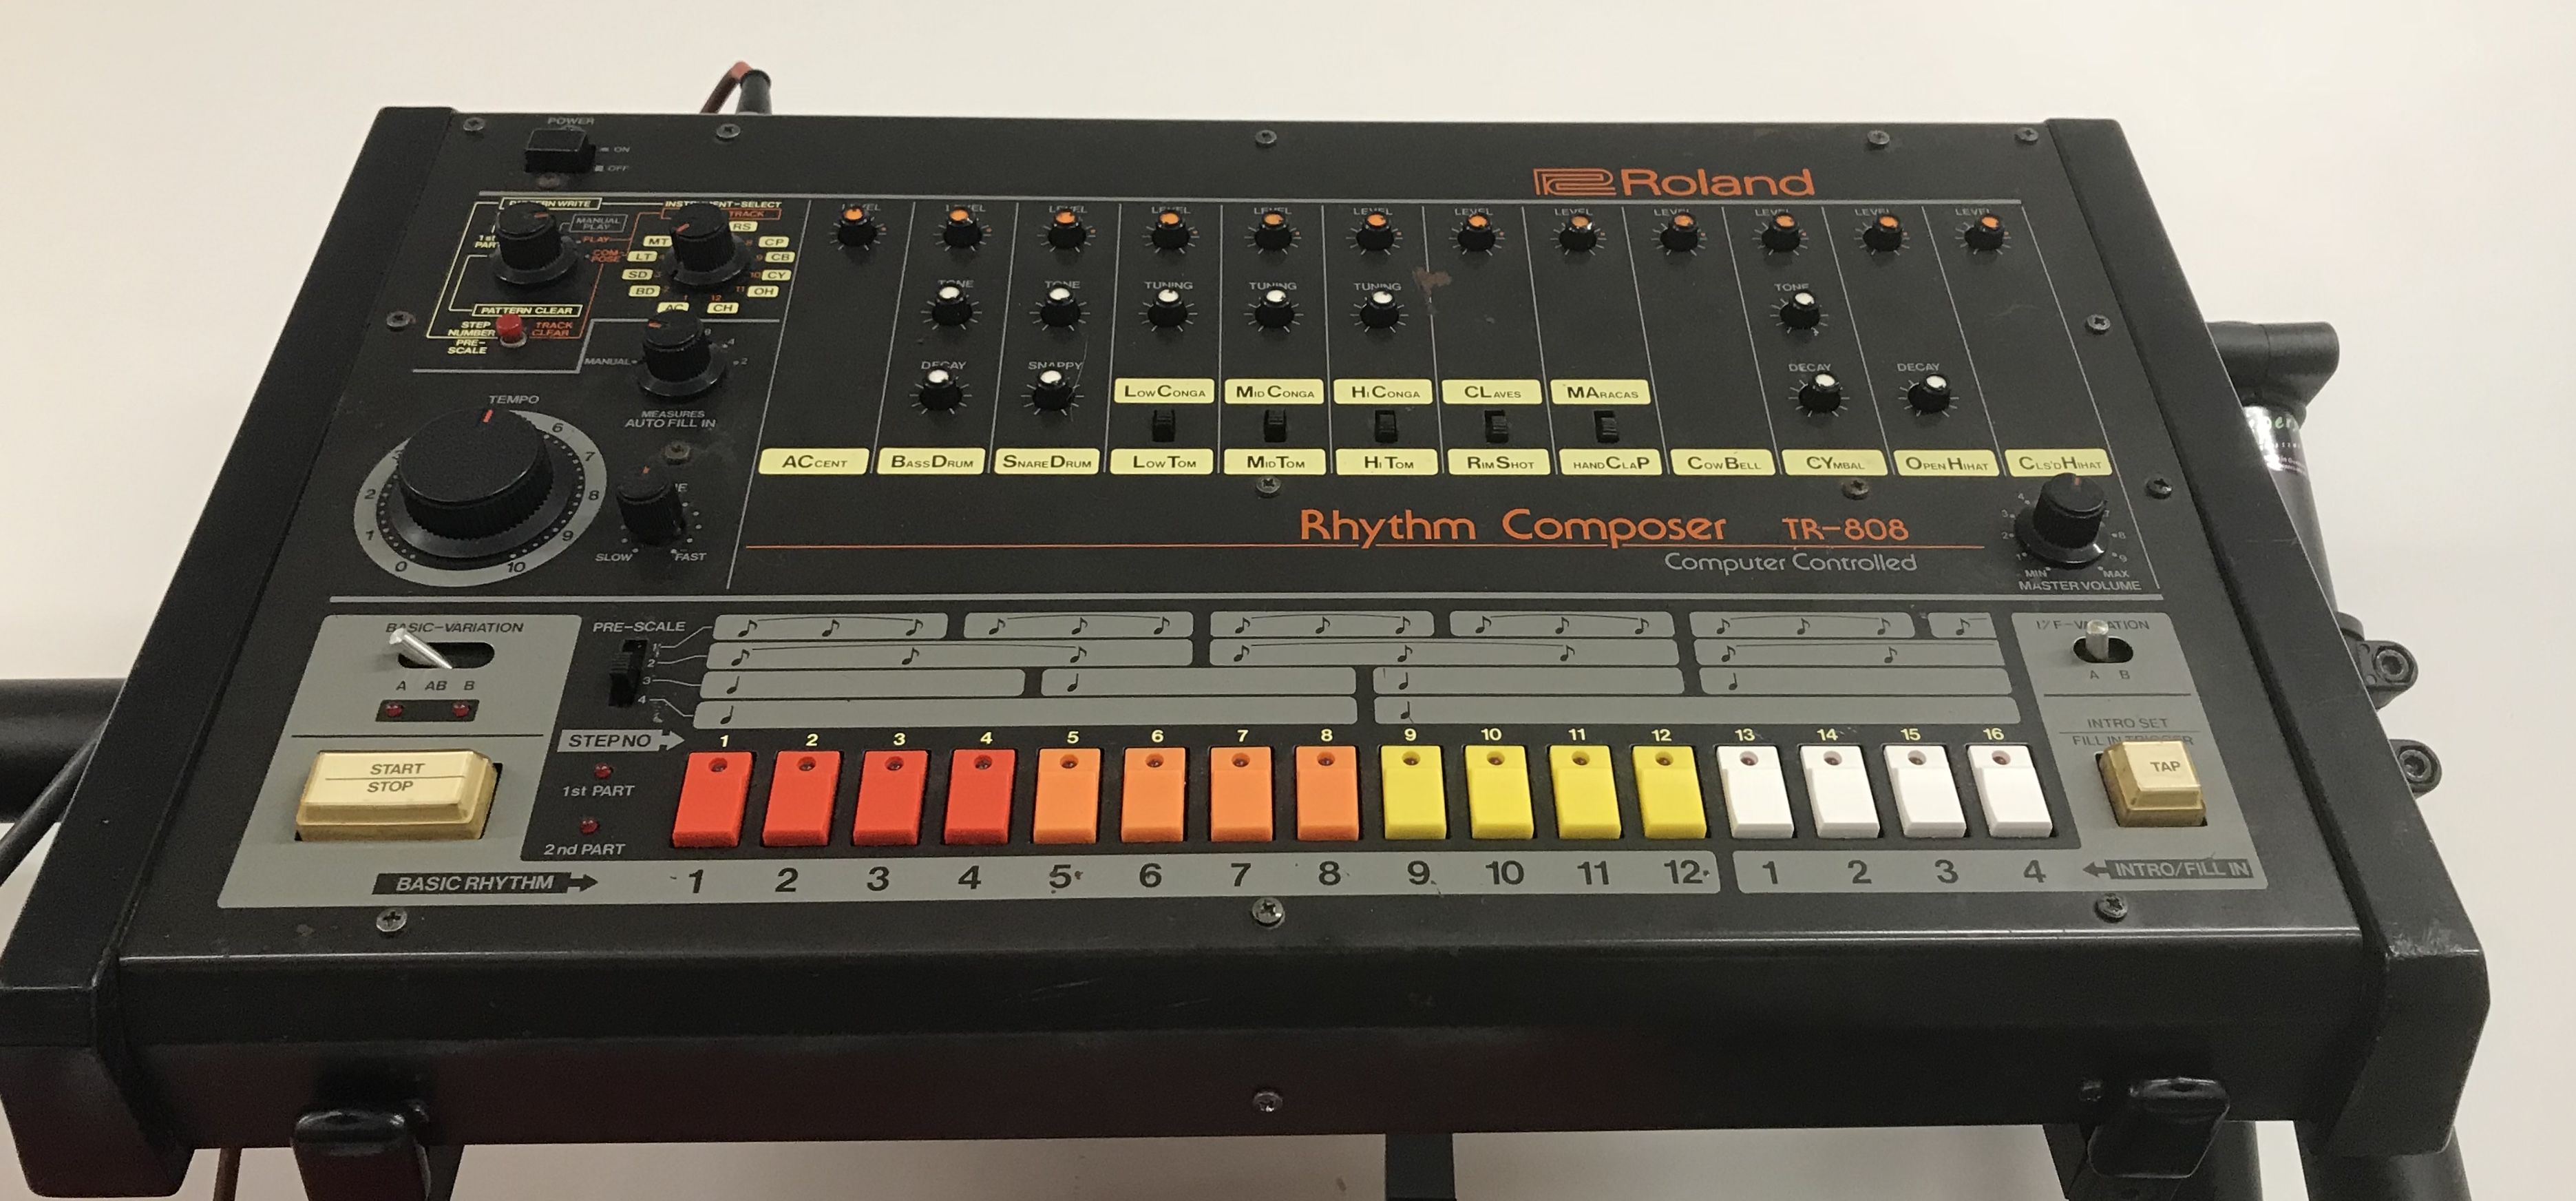 repetition Conductivity Firefighter Roland TR-808 - A Brief History